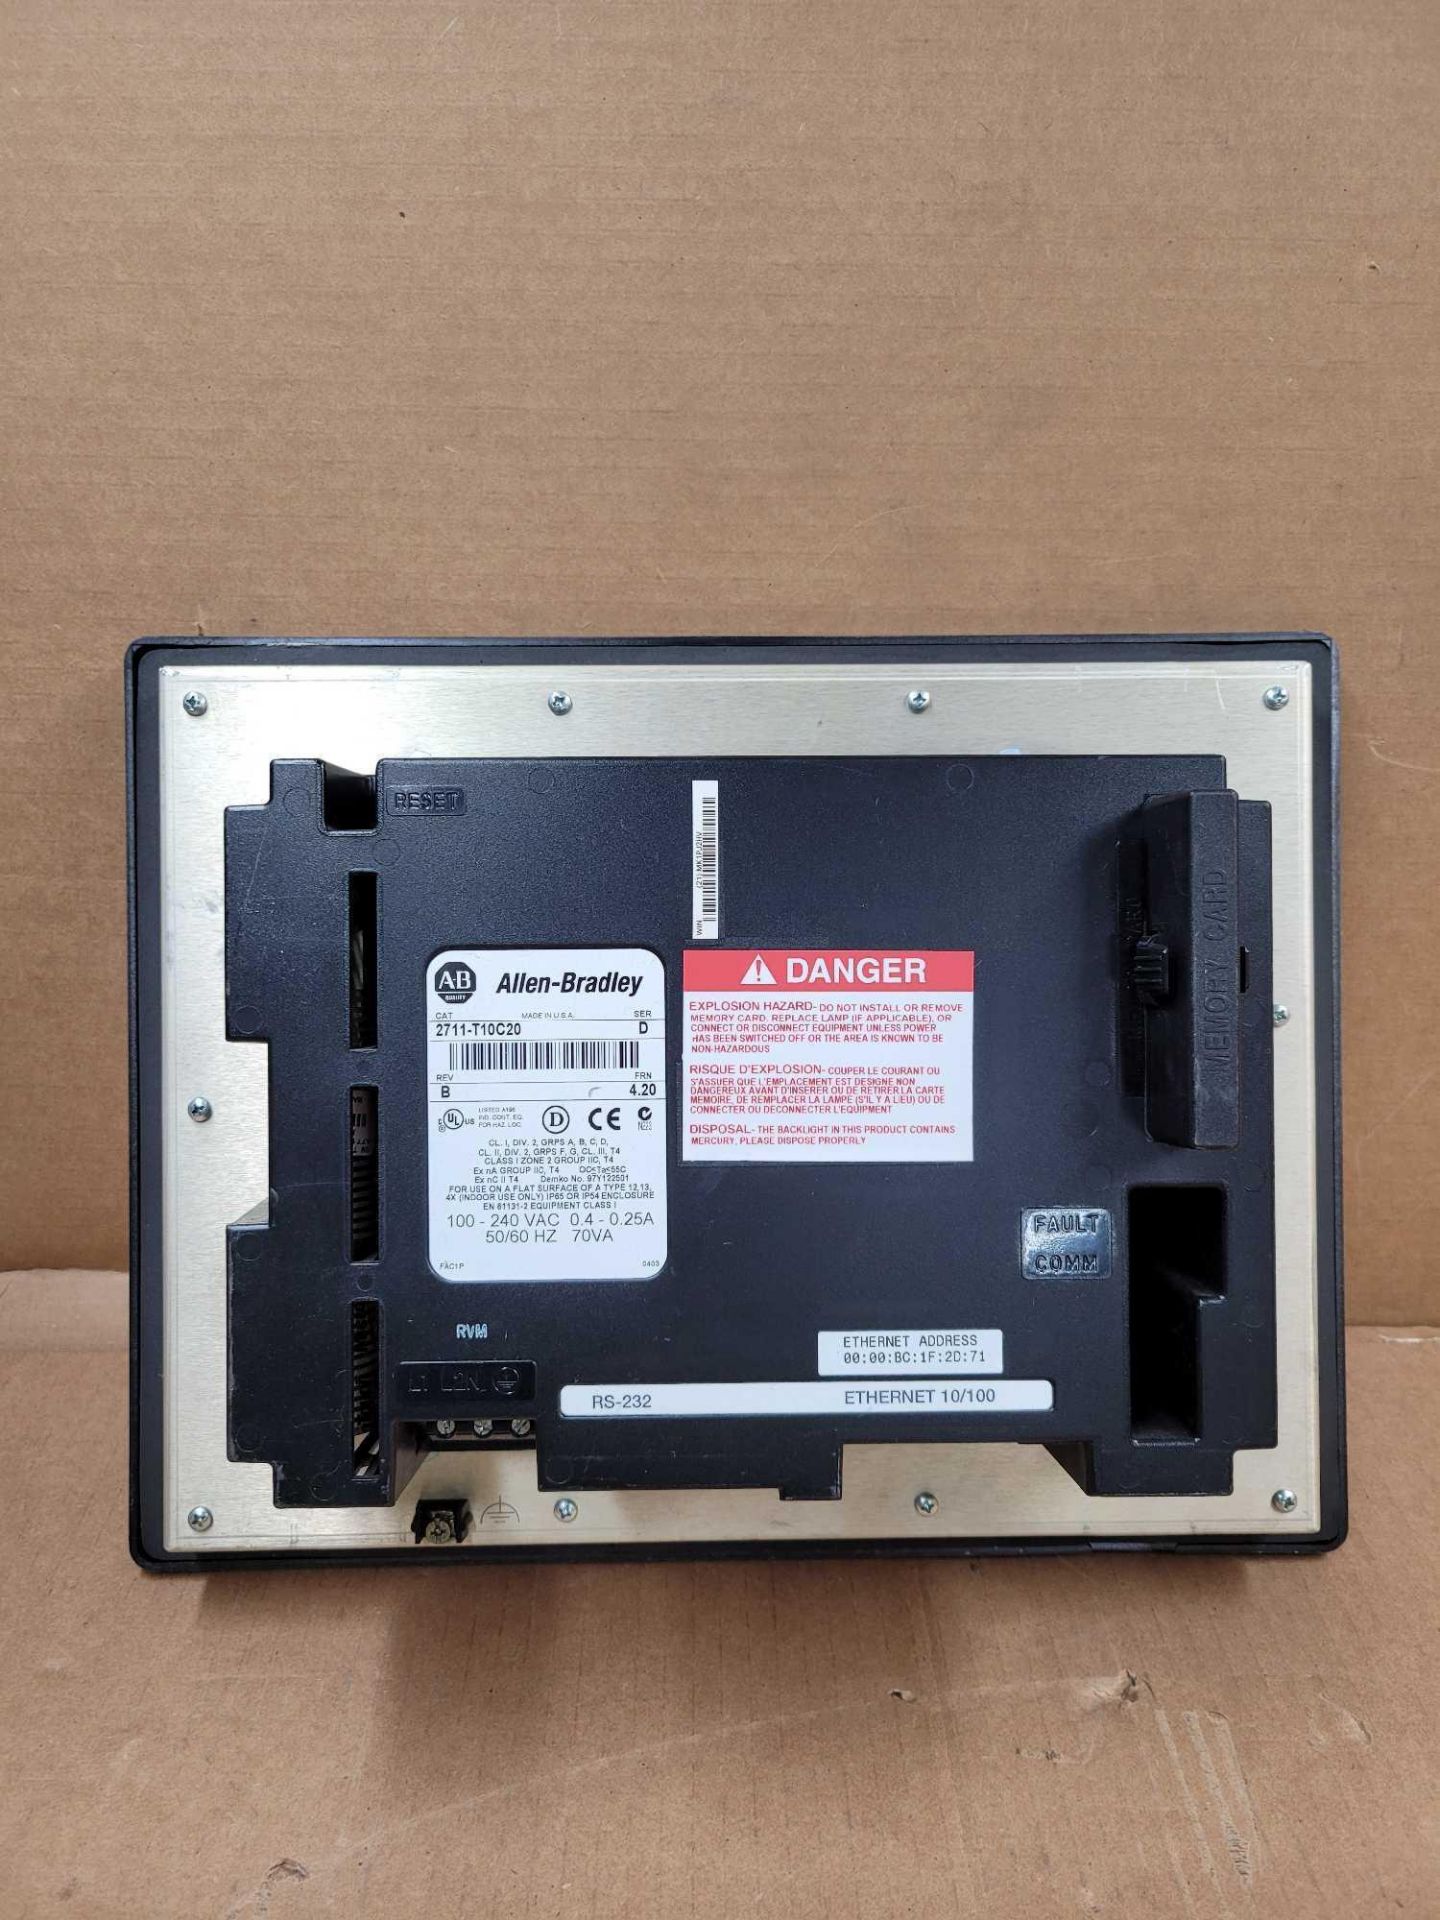 ALLEN BRADLEY 2711-T10C20 / Series D PanelView 1000 Operator Interface  /  Lot Weight: 6.6 lbs - Image 2 of 5